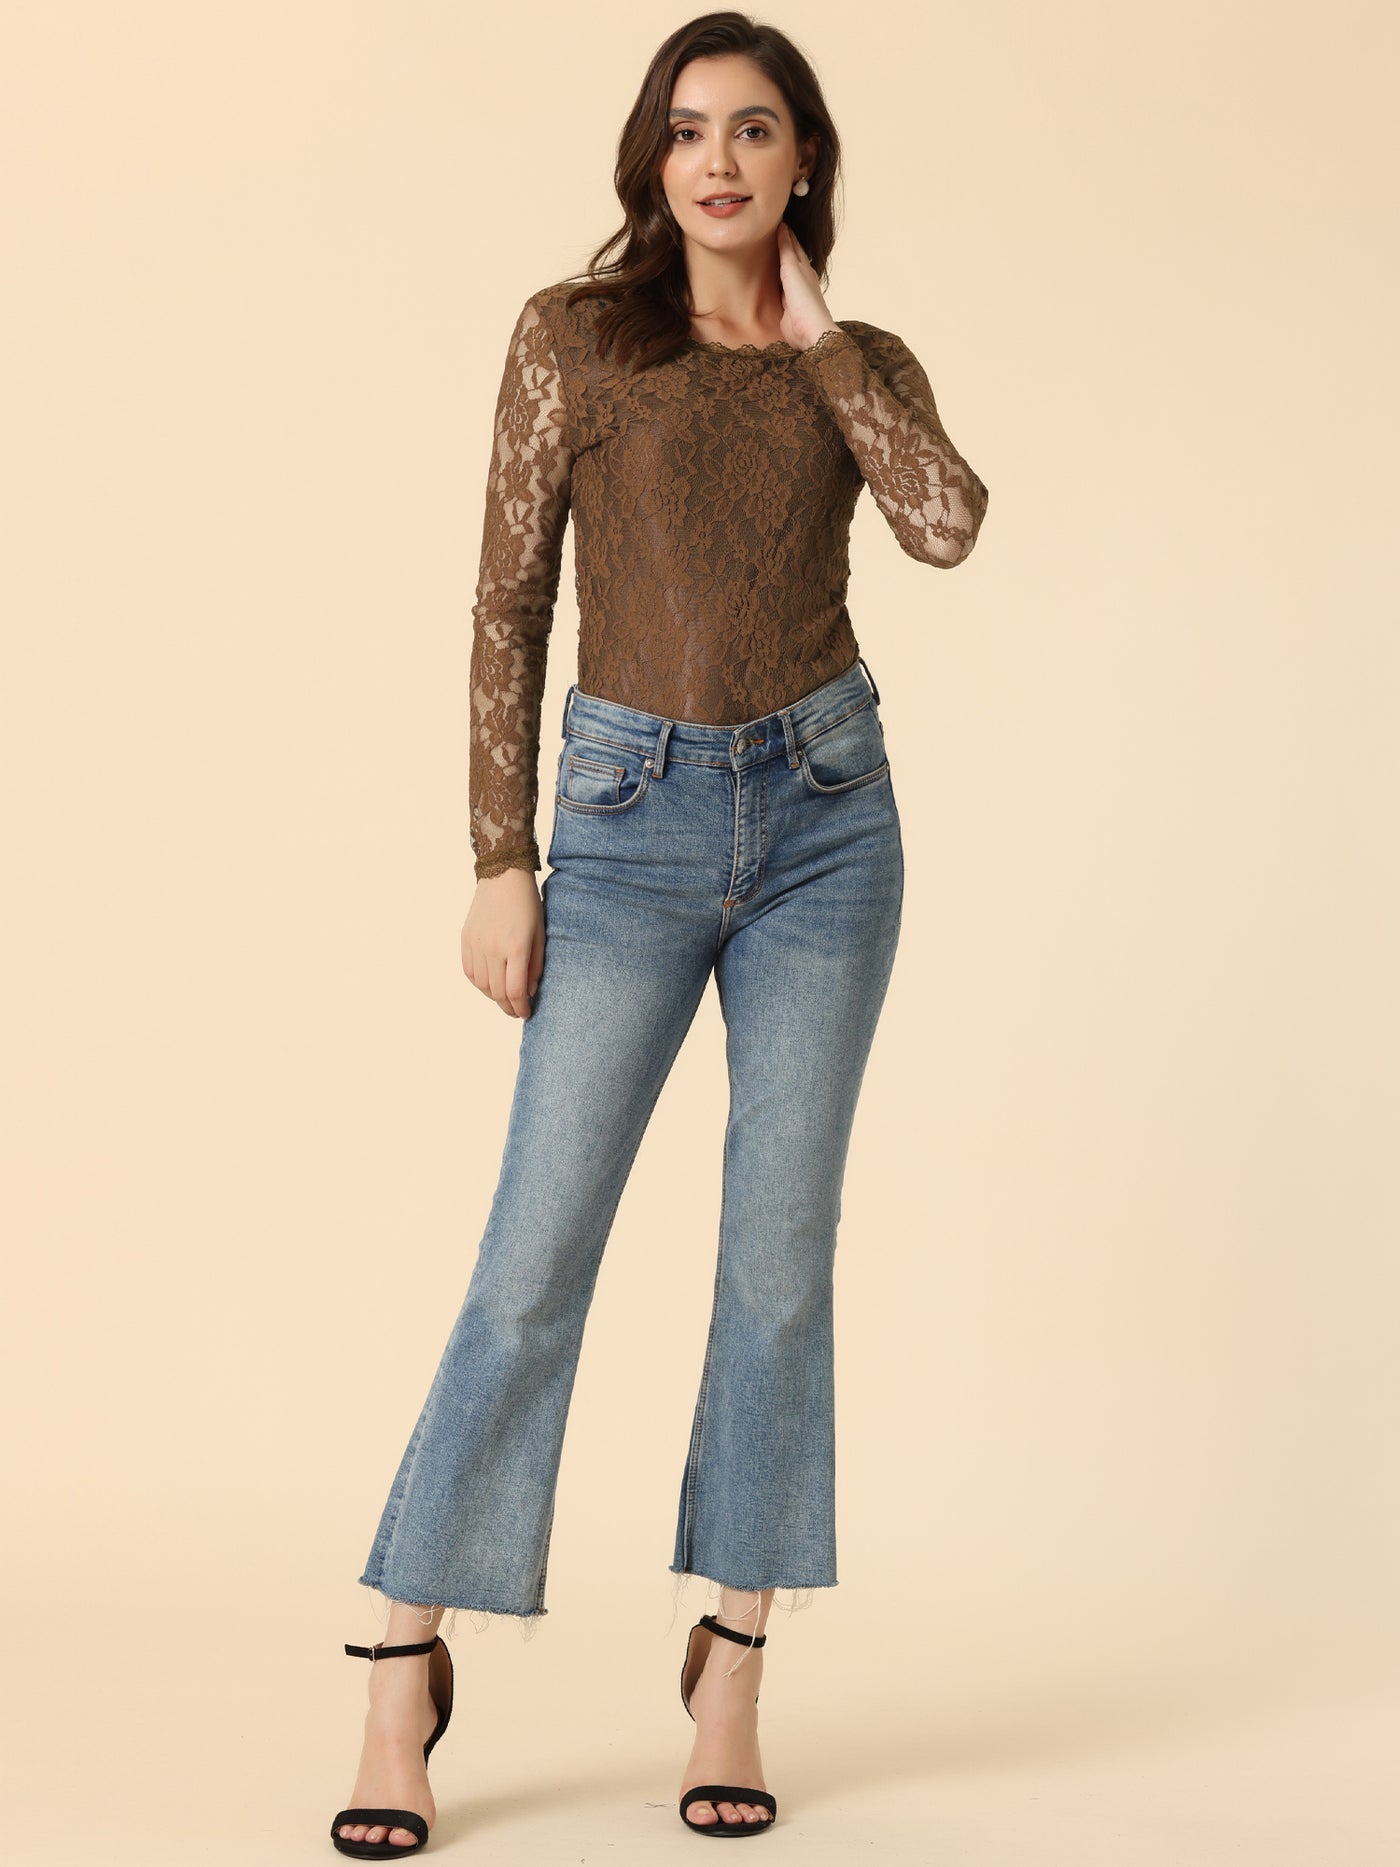 Allegra K Crew Neck Sheer Long Sleeve Flower Embroidery Lace Blouse